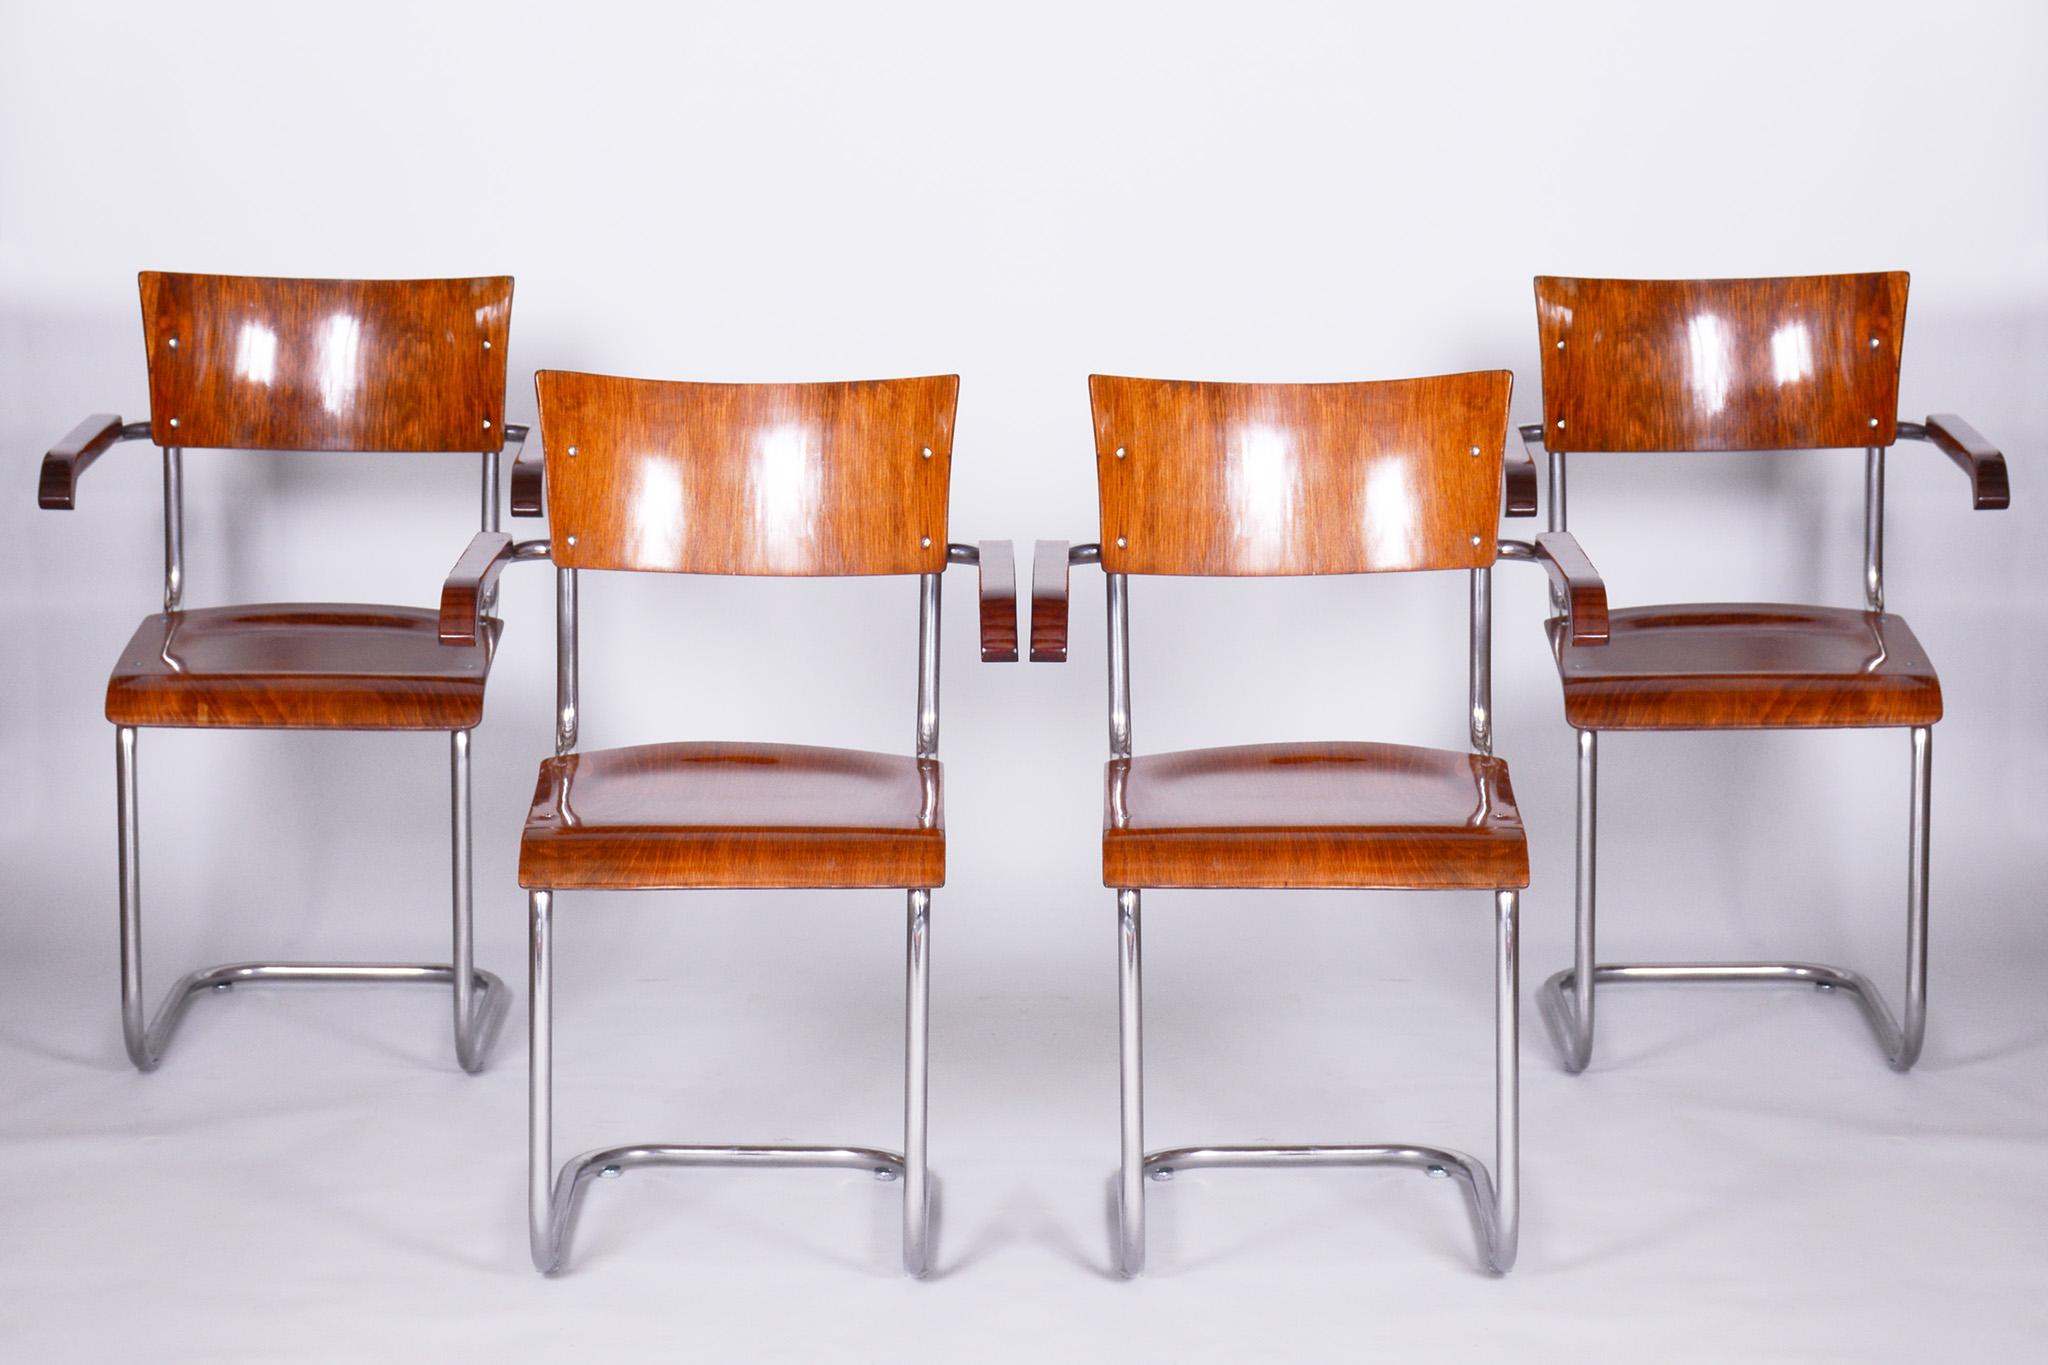 Set of 4 Restored Bauhaus Beech Armchairs Designed by Mart Stam, 1930s, Czechia For Sale 3